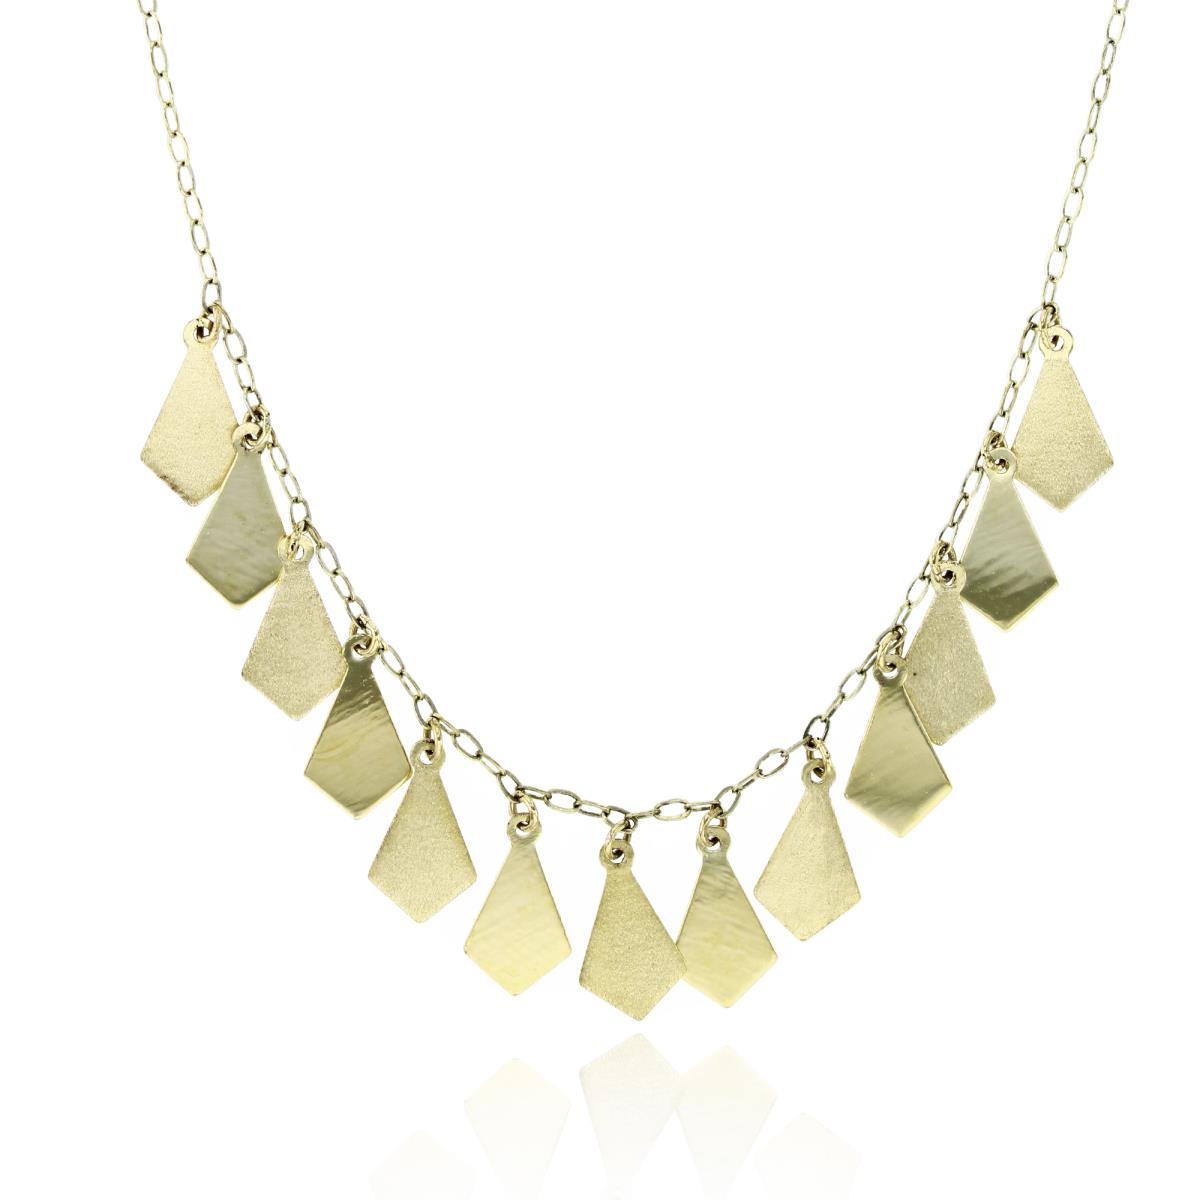 10K Yellow Gold Polished Kite Dangling 17" Necklace